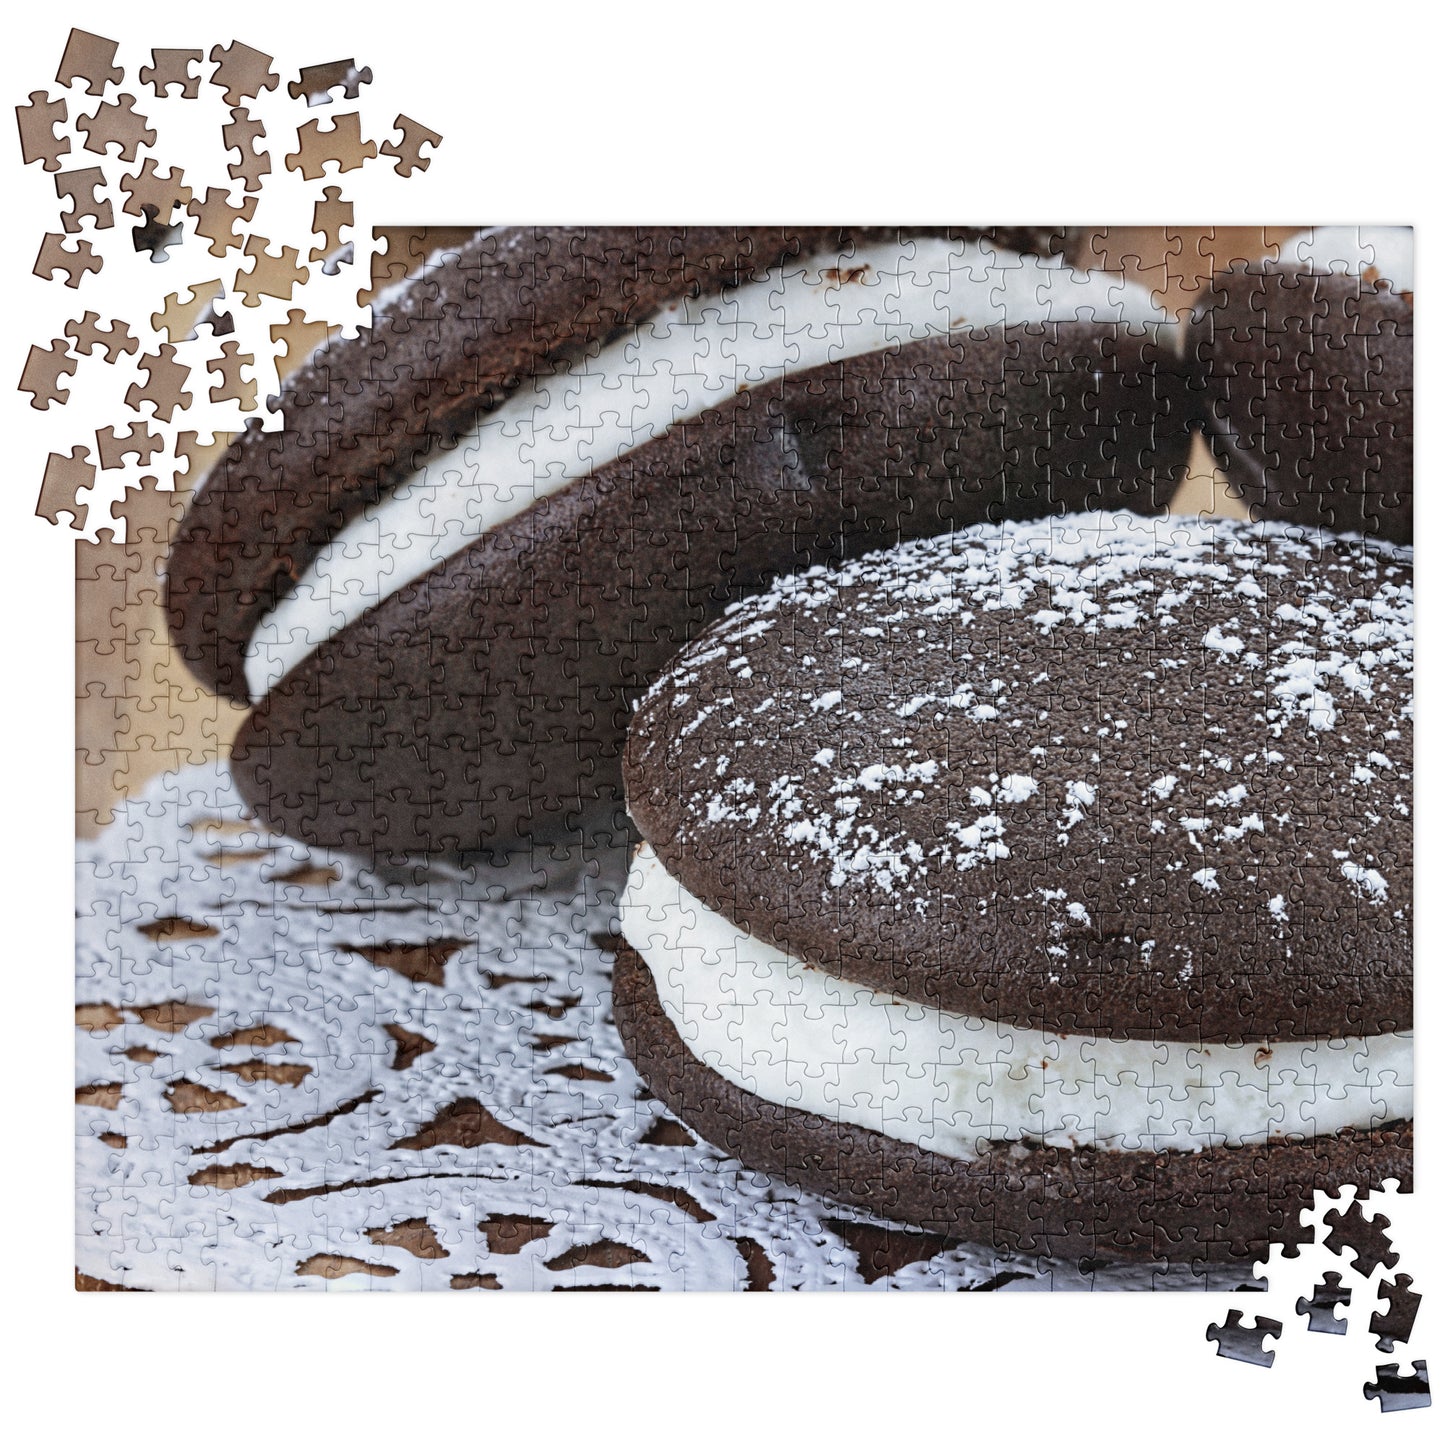 Winter Jigsaw Puzzle: Whoopie Pies